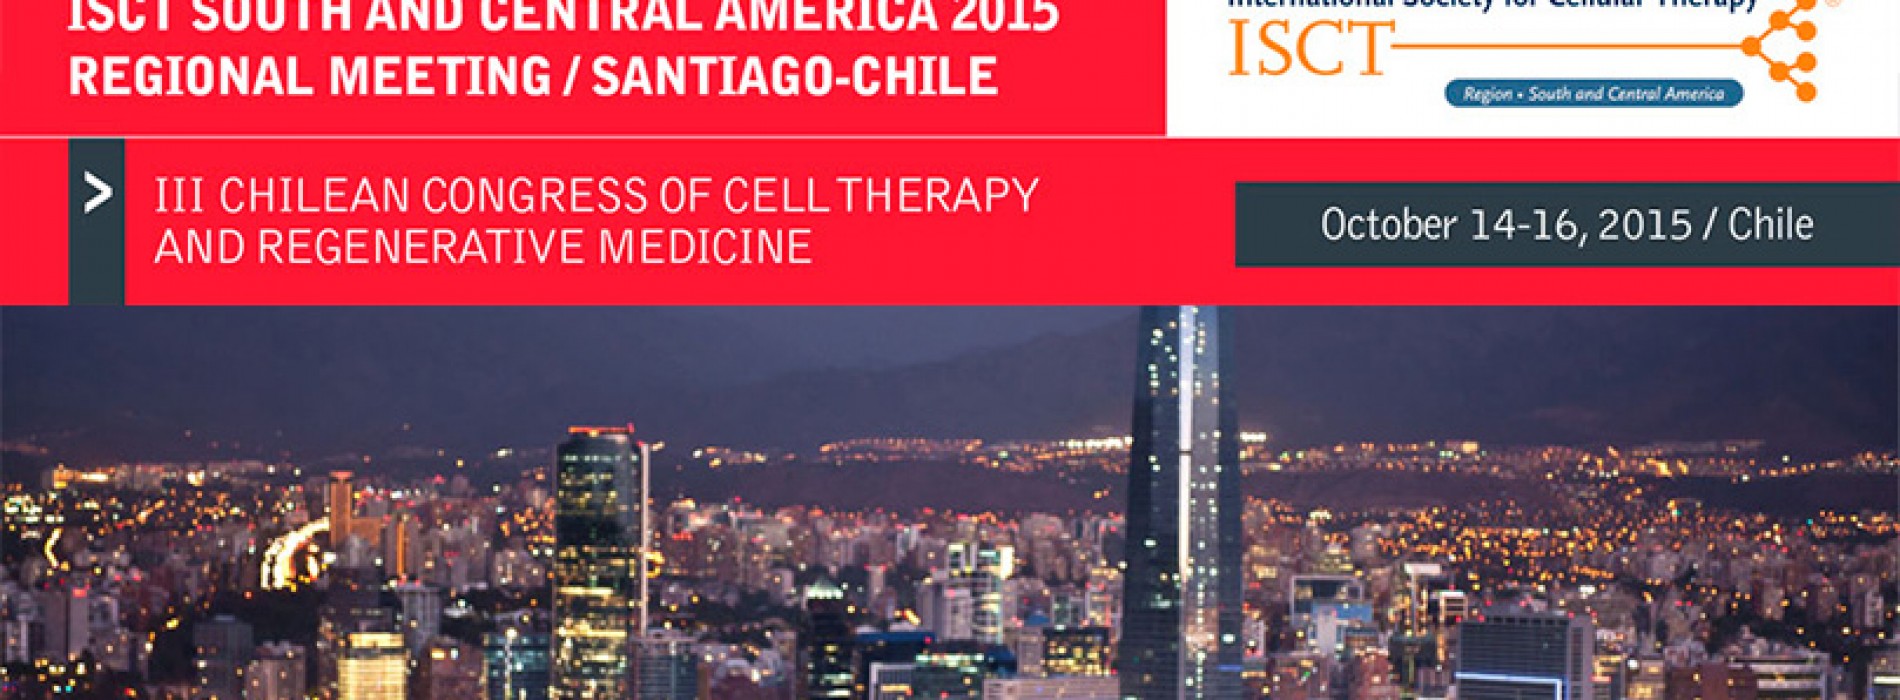 "ISCT 2015 South and Central America Regional Meeting and the III Congress of cell therapy"